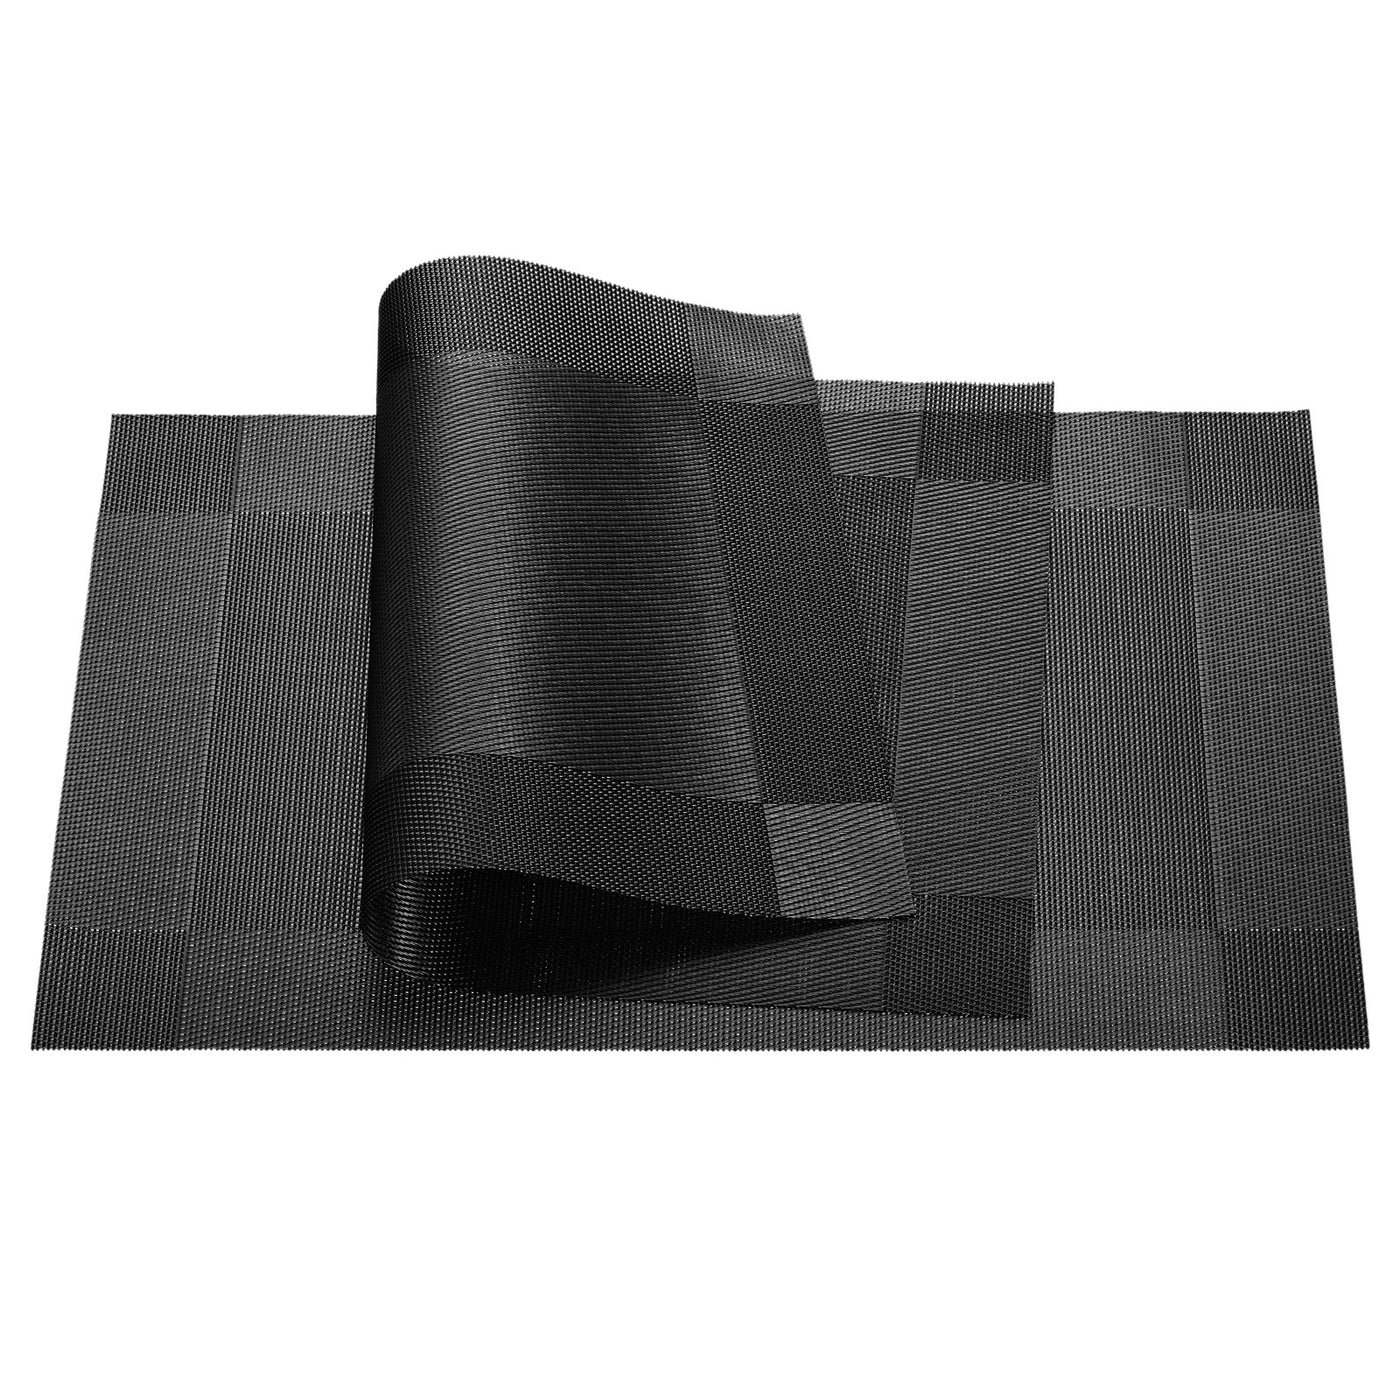 uxcell Uxcell Place Mats 450x300mm 2pcs PVC Table Washable Woven Placemat, Black Gray